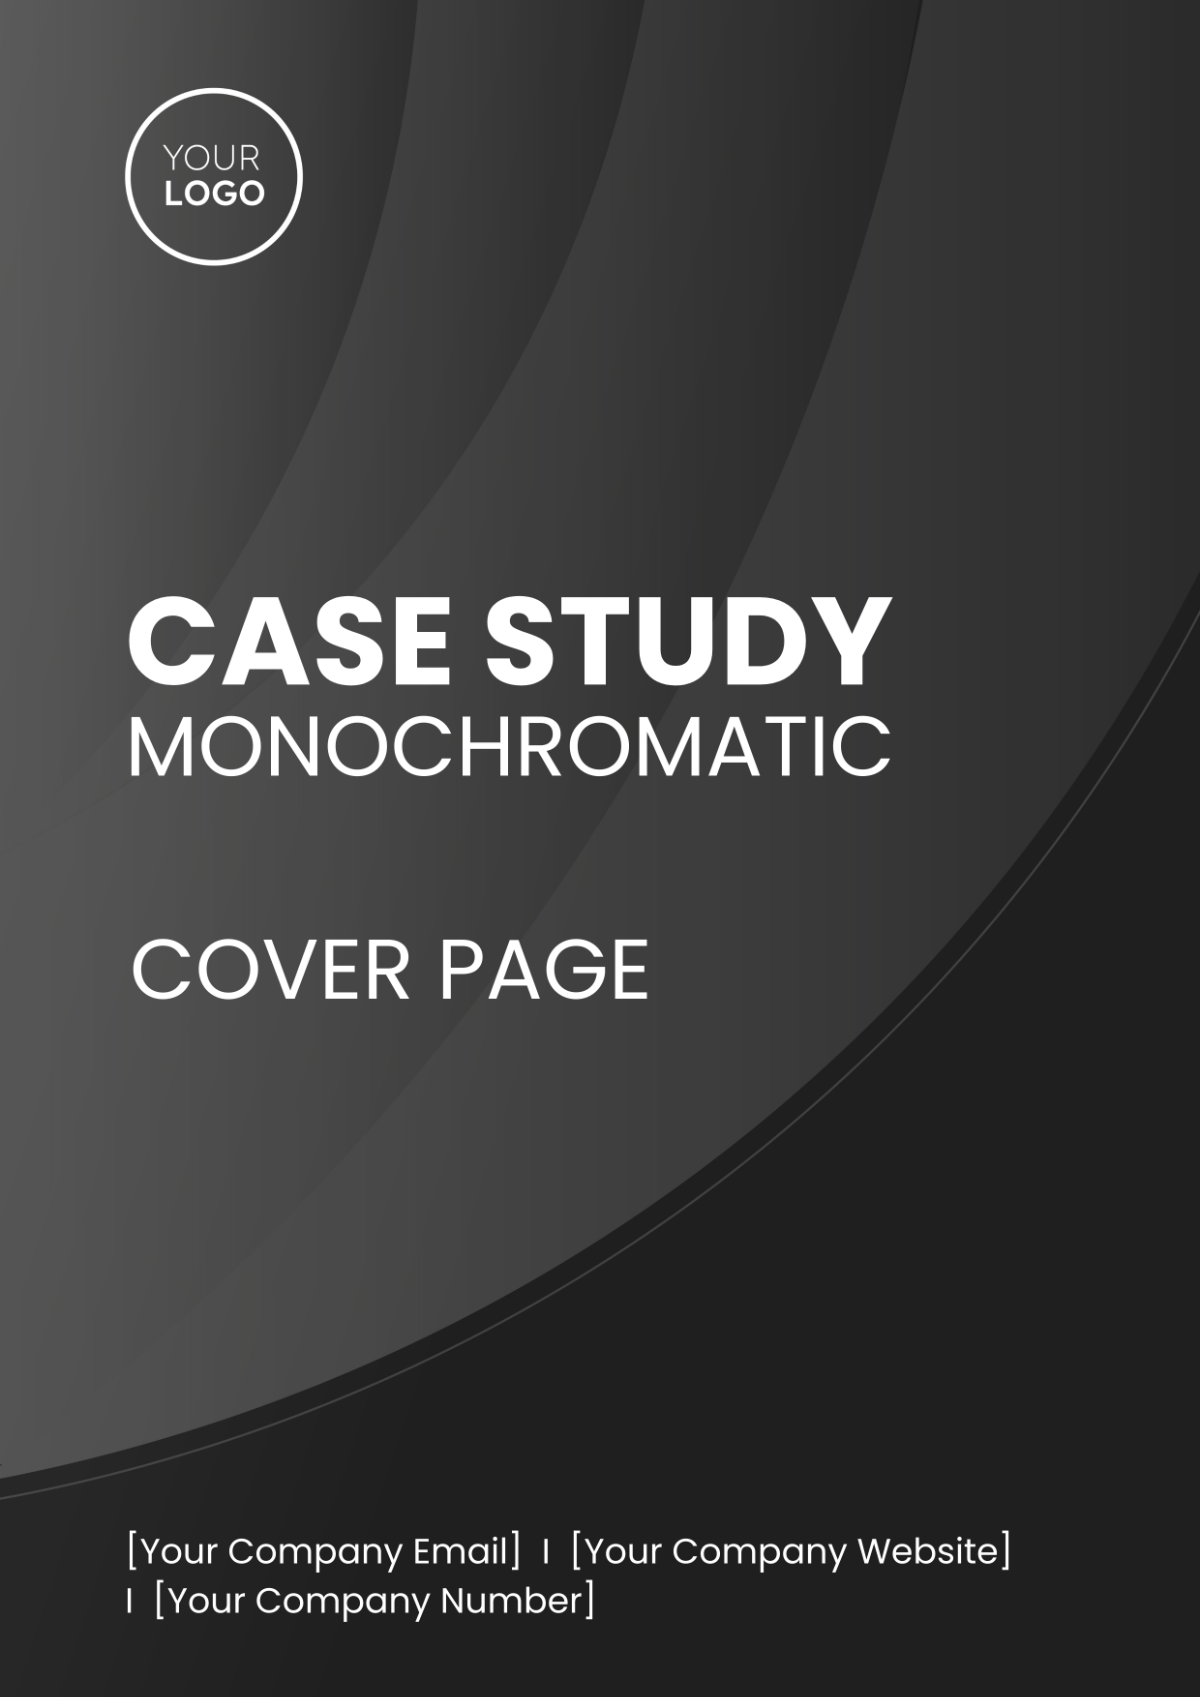 Case Study Monochromatic Cover Page